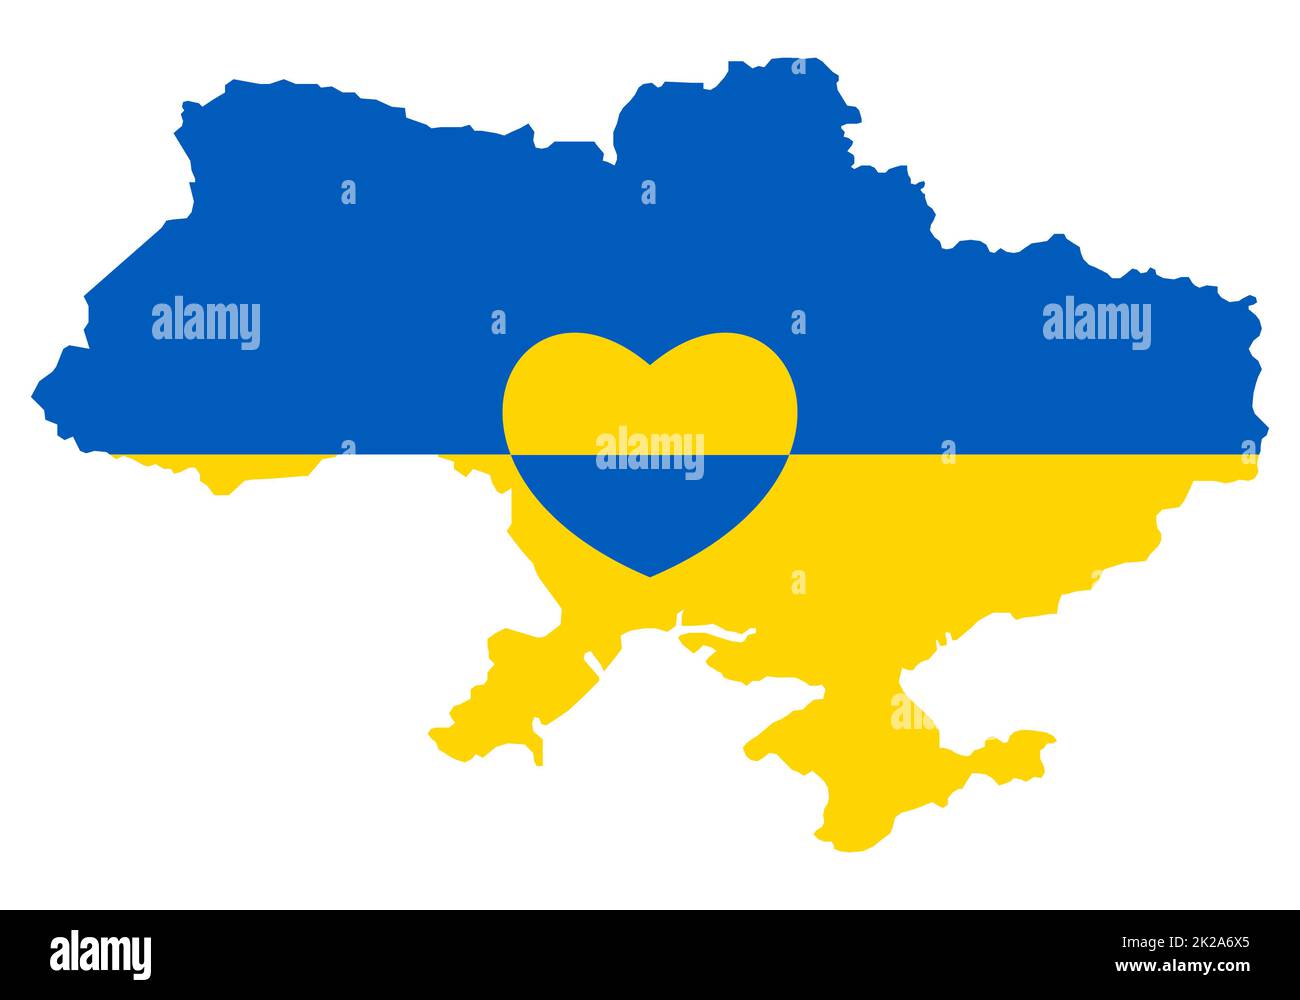 Ukraine map with heart icon. Abstract patriotic ukrainian flag with love symbol. Blue and yellow conceptual idea - with Ukraine in his heart. Support for the country during the occupation. Stop war. Stock Photo